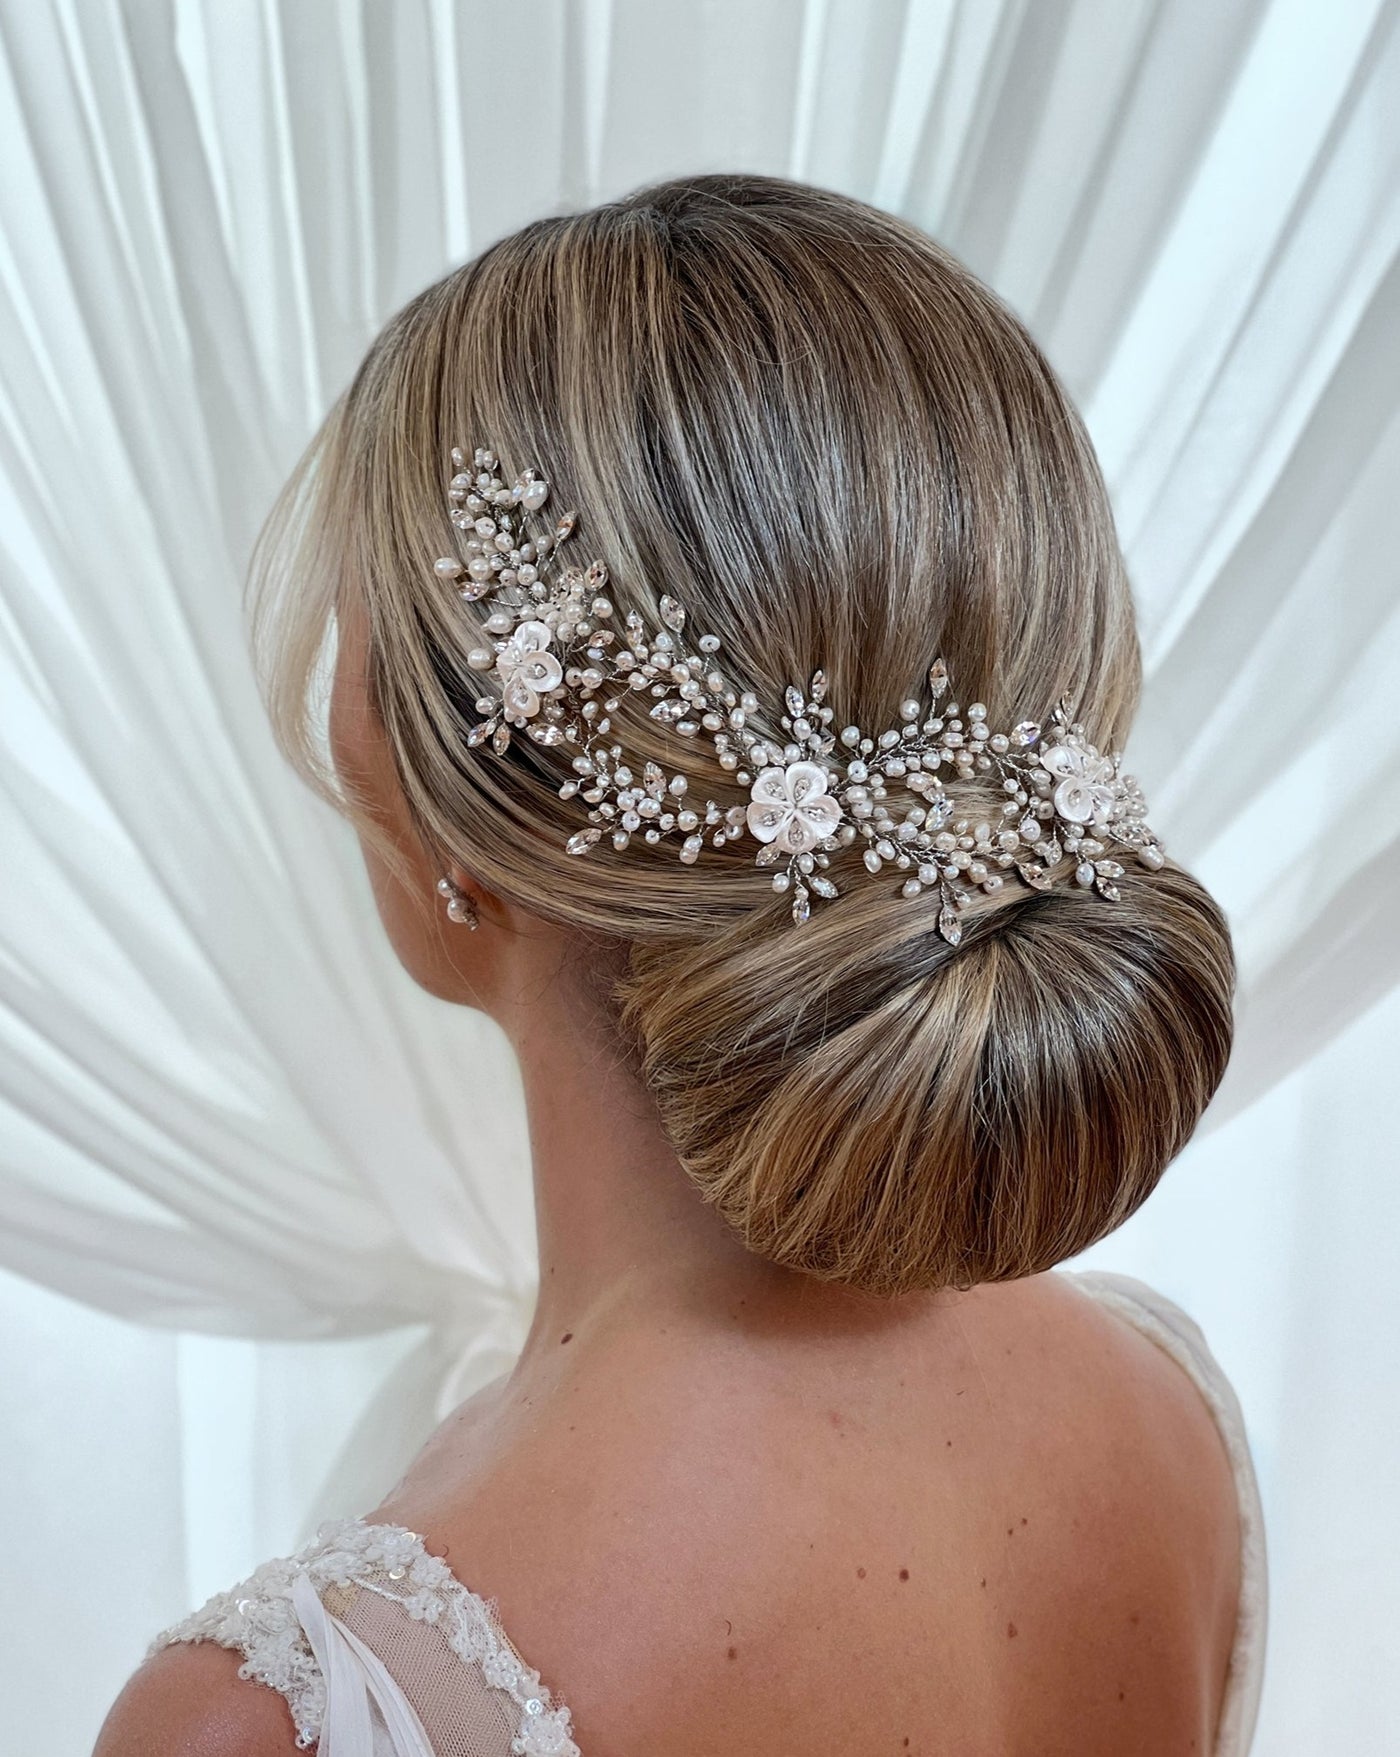 female model wearing looping bridal hair vine with pearls, springs of crystals, and porcelain flower details above an updo, side view